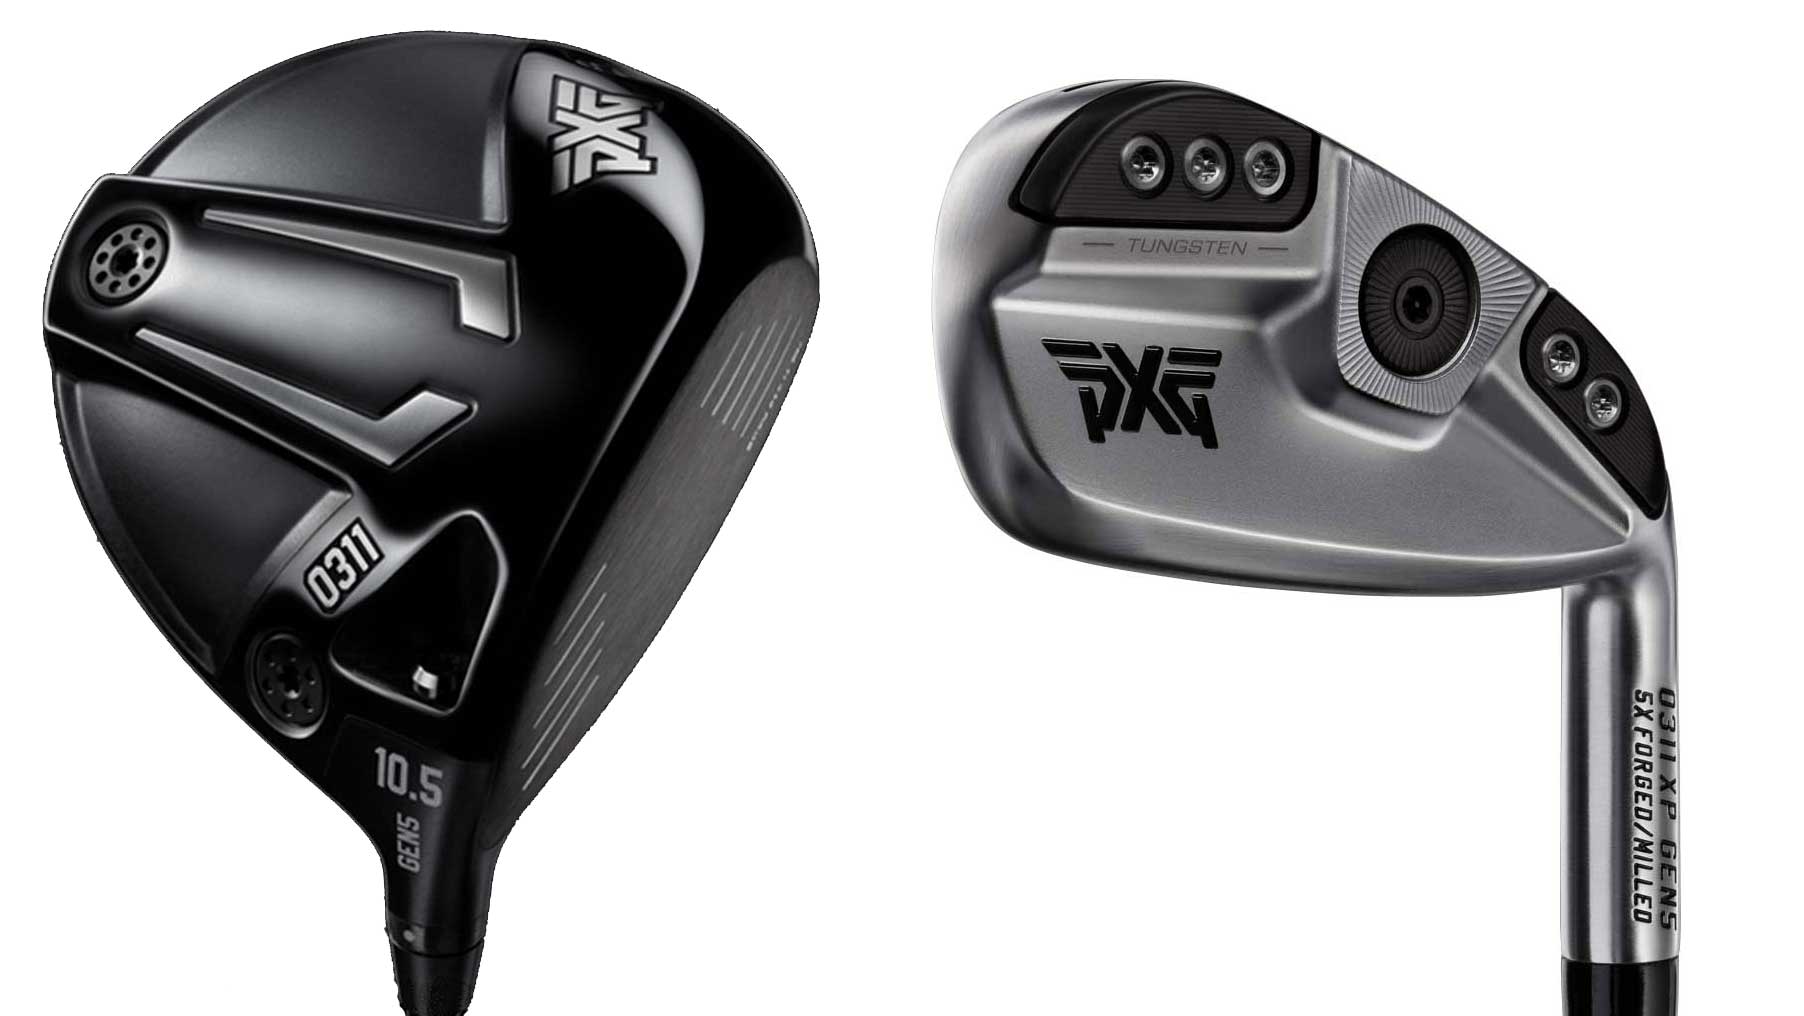 New PXG golf clubs for 2023 (drivers, irons, woods, hybrids) ClubTest 2023